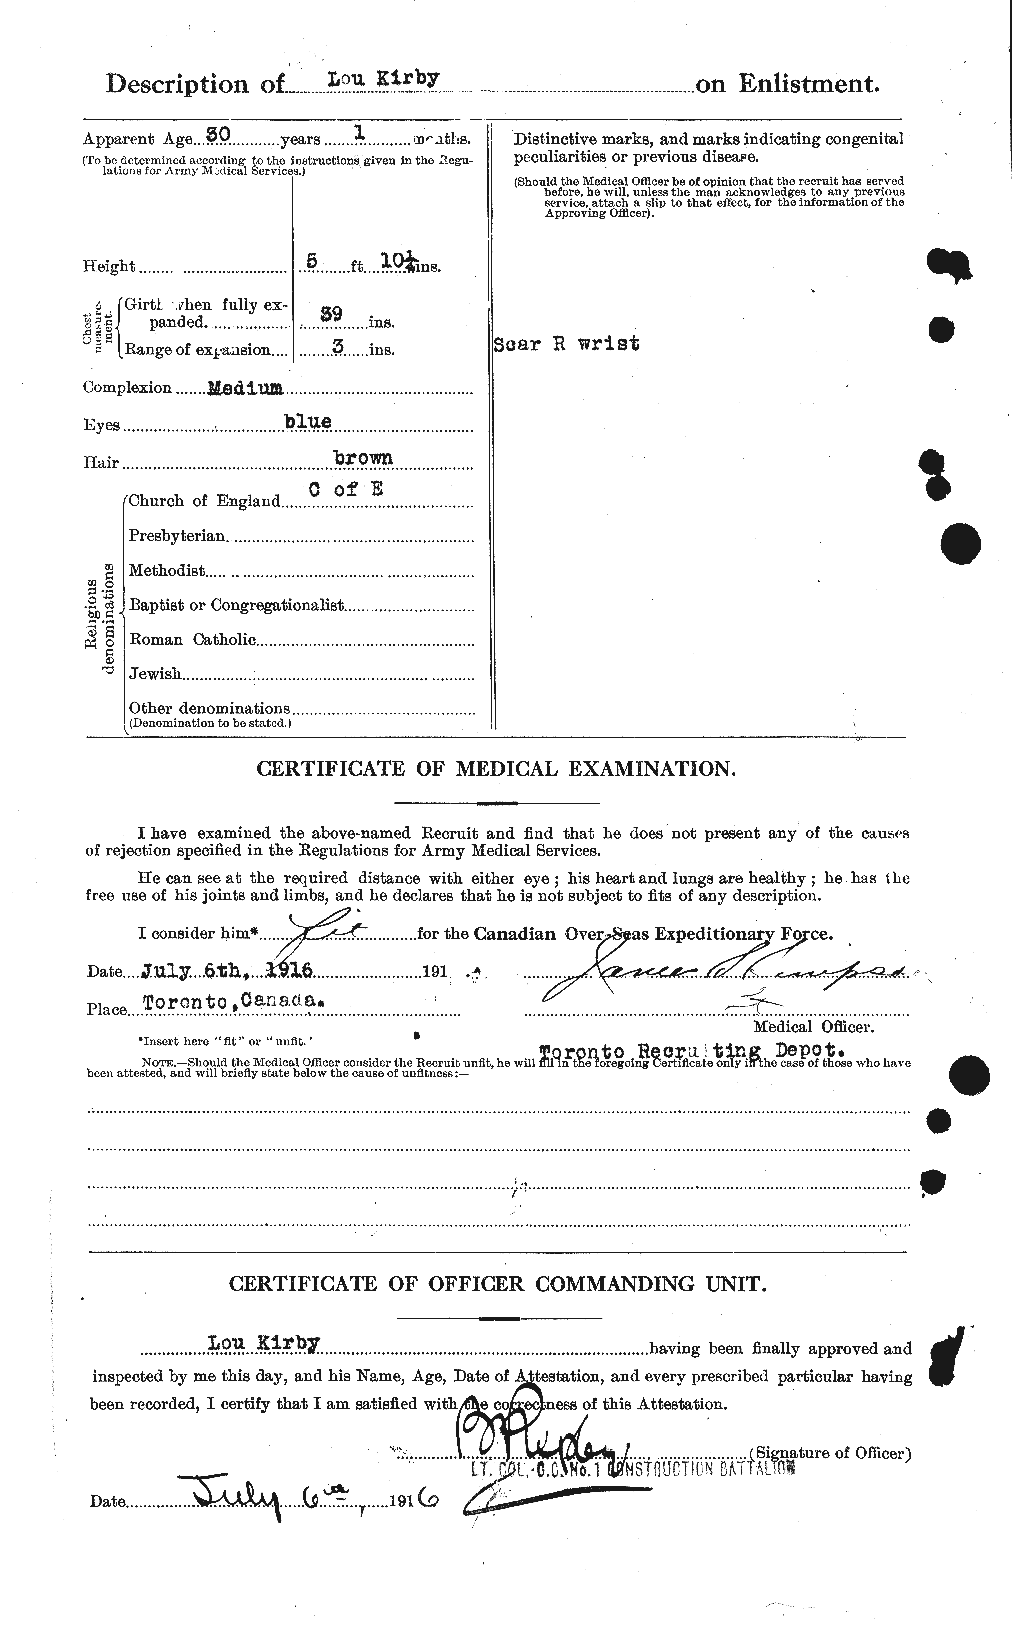 Personnel Records of the First World War - CEF 437251b